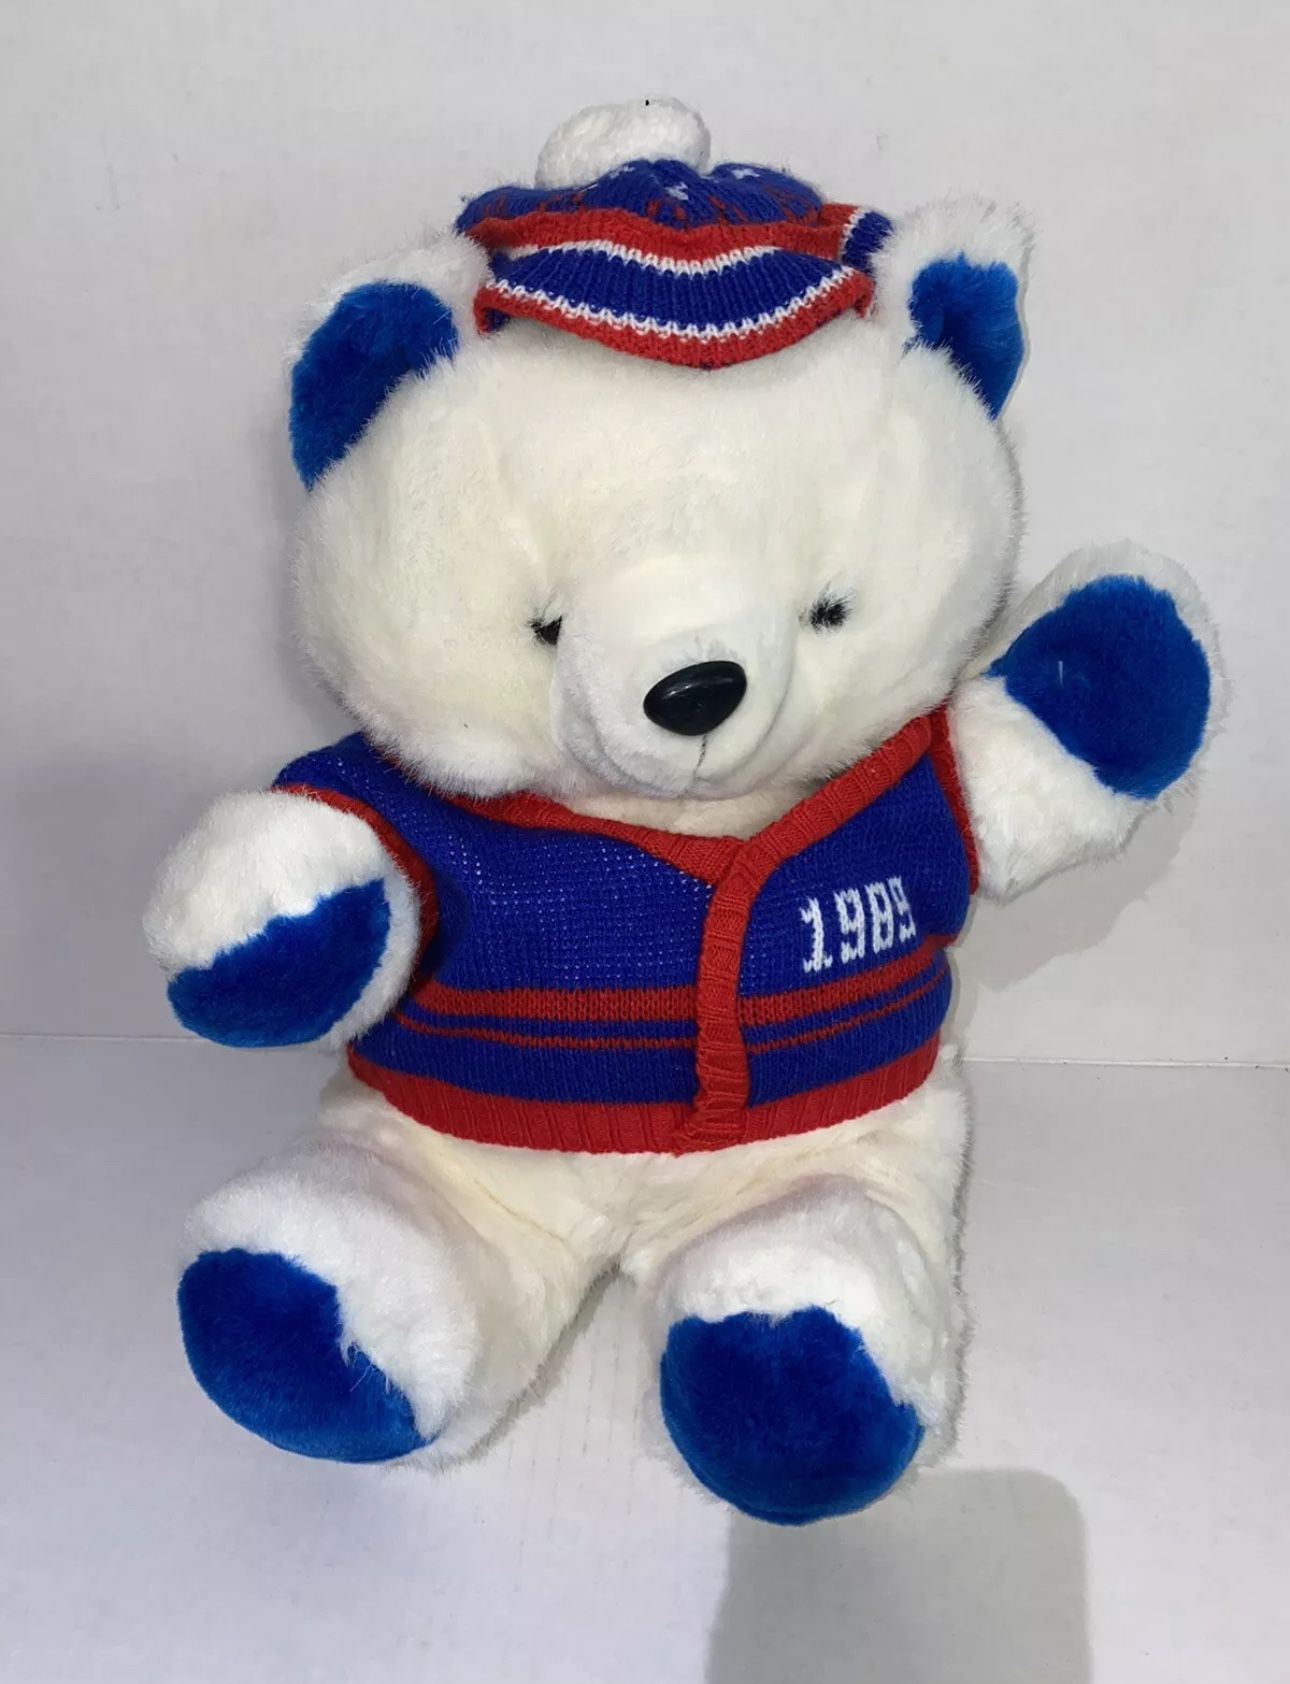 1989 Vintage KMART With Teddy Bear Plush with Red & Blue Outfit